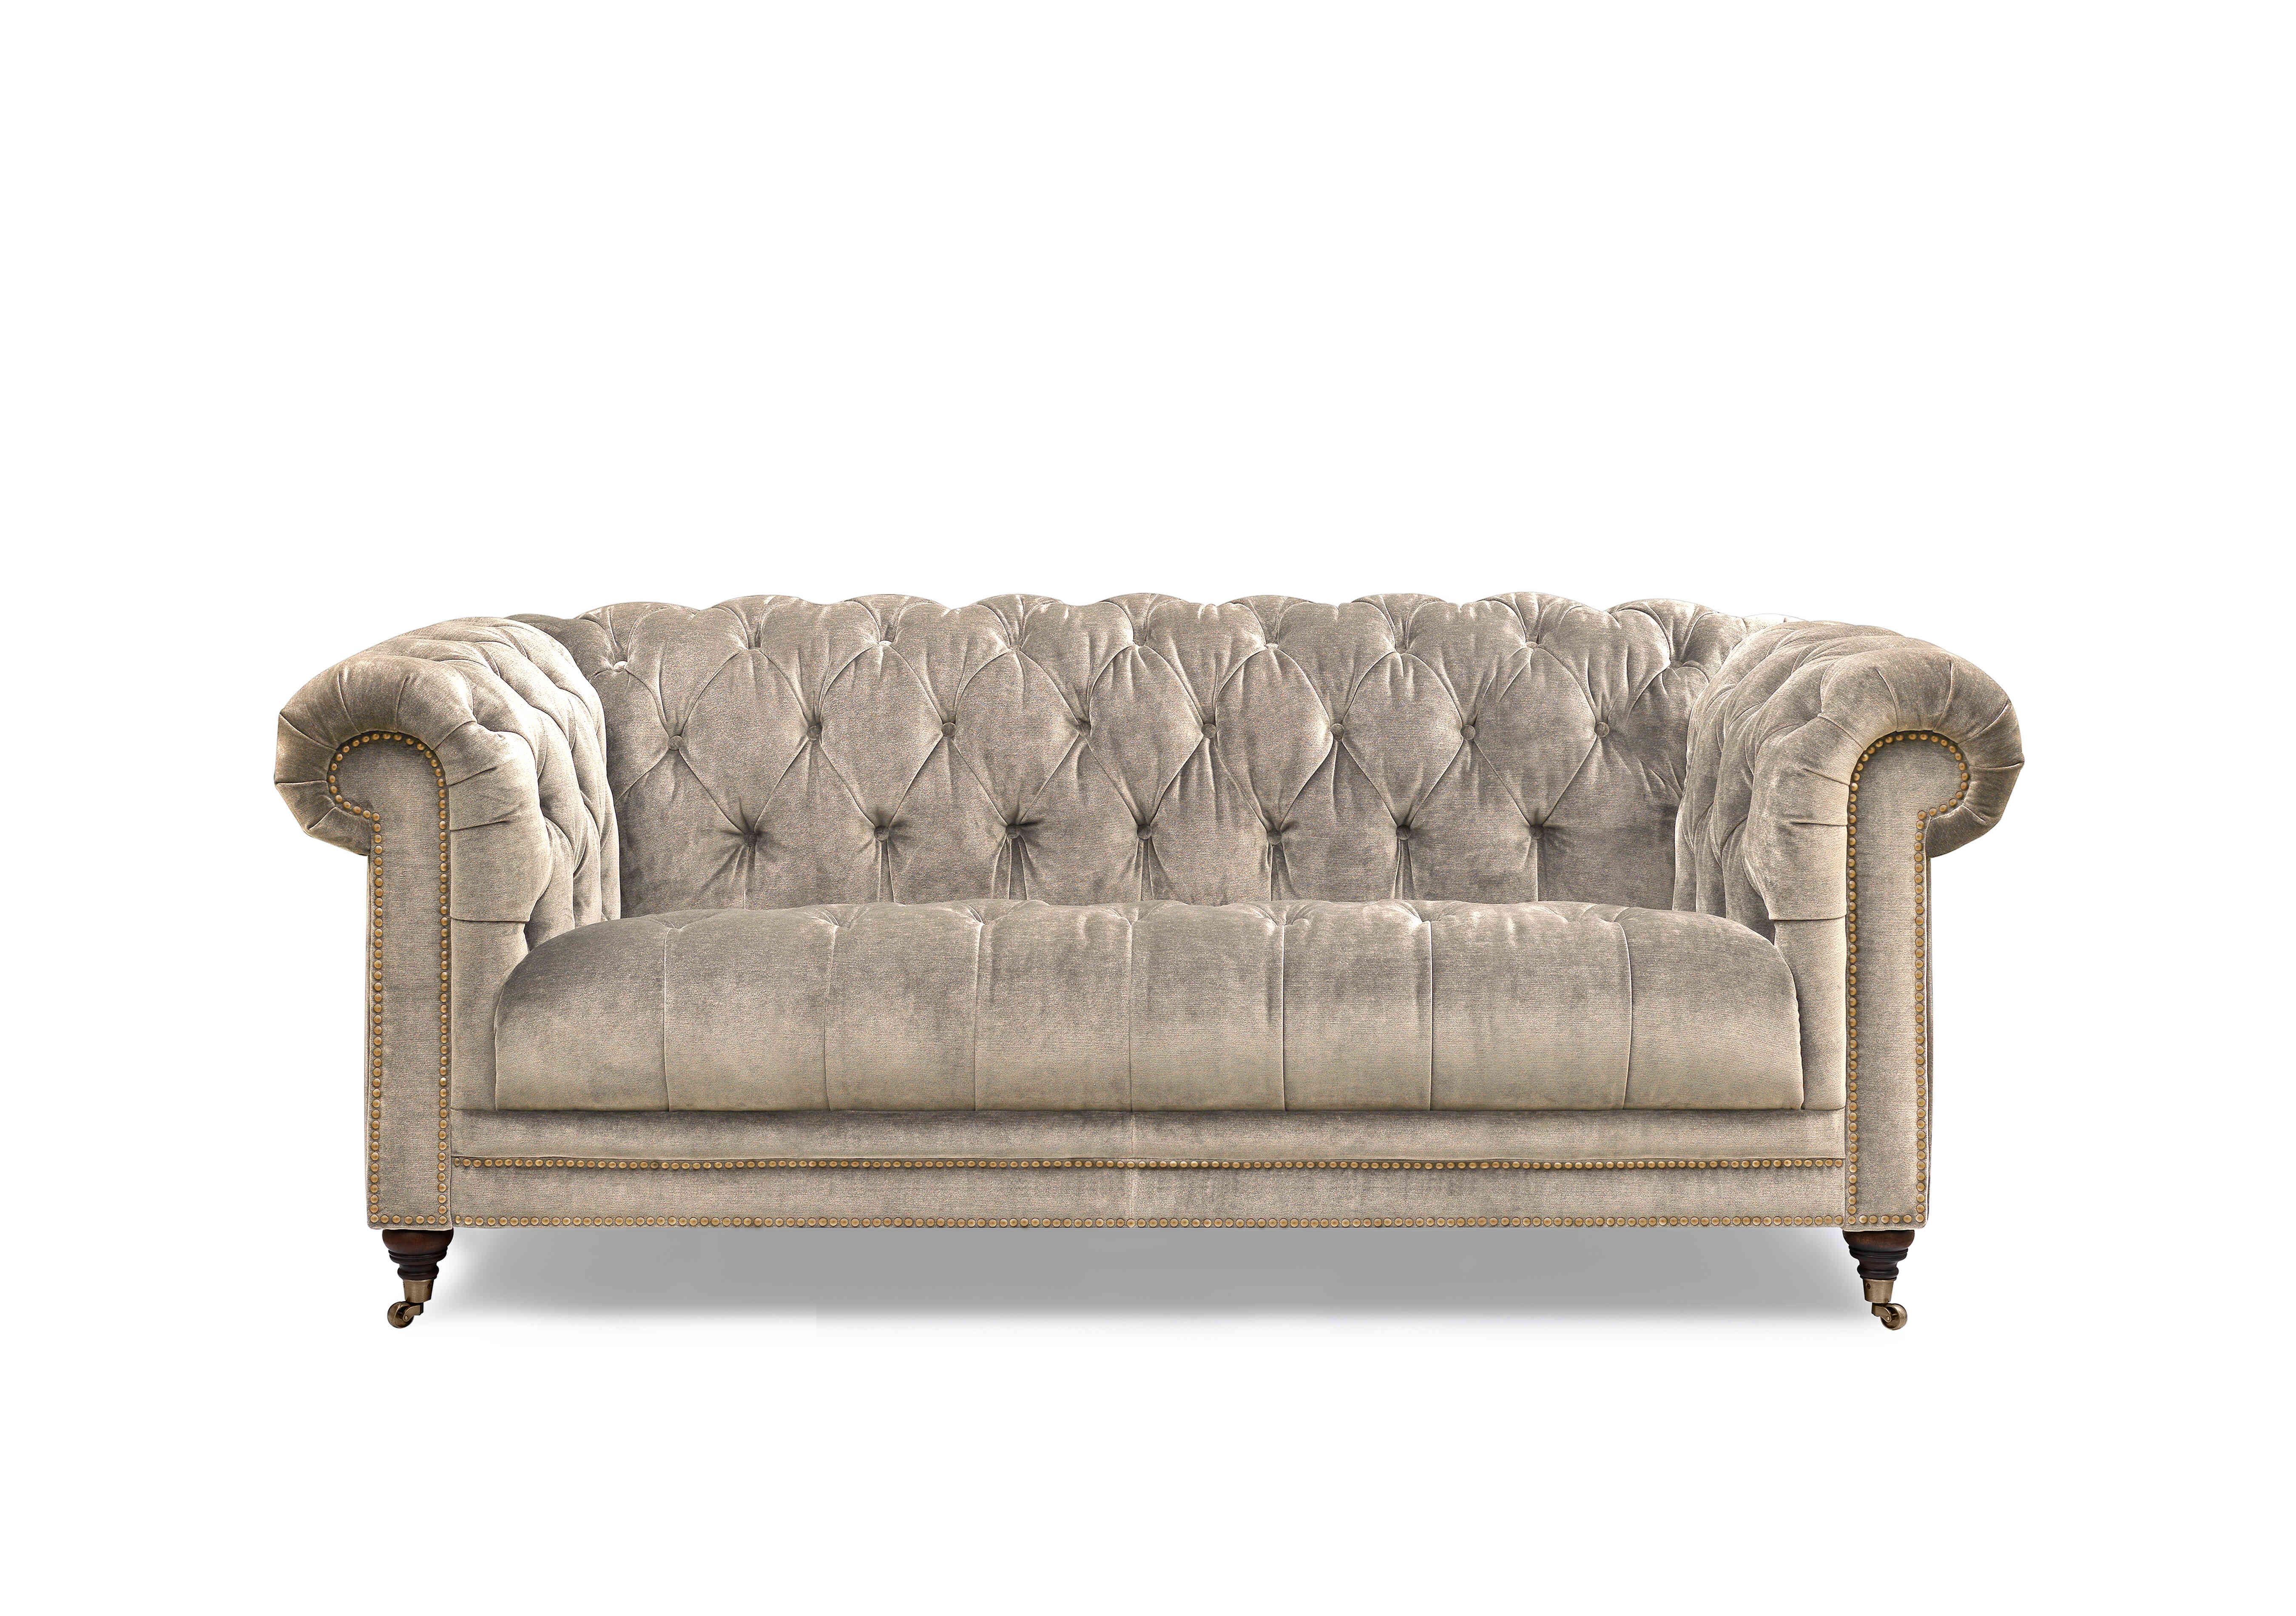 Walter 3 Seater Fabric Chesterfield Sofa in X3y1-W022 Barley on Furniture Village